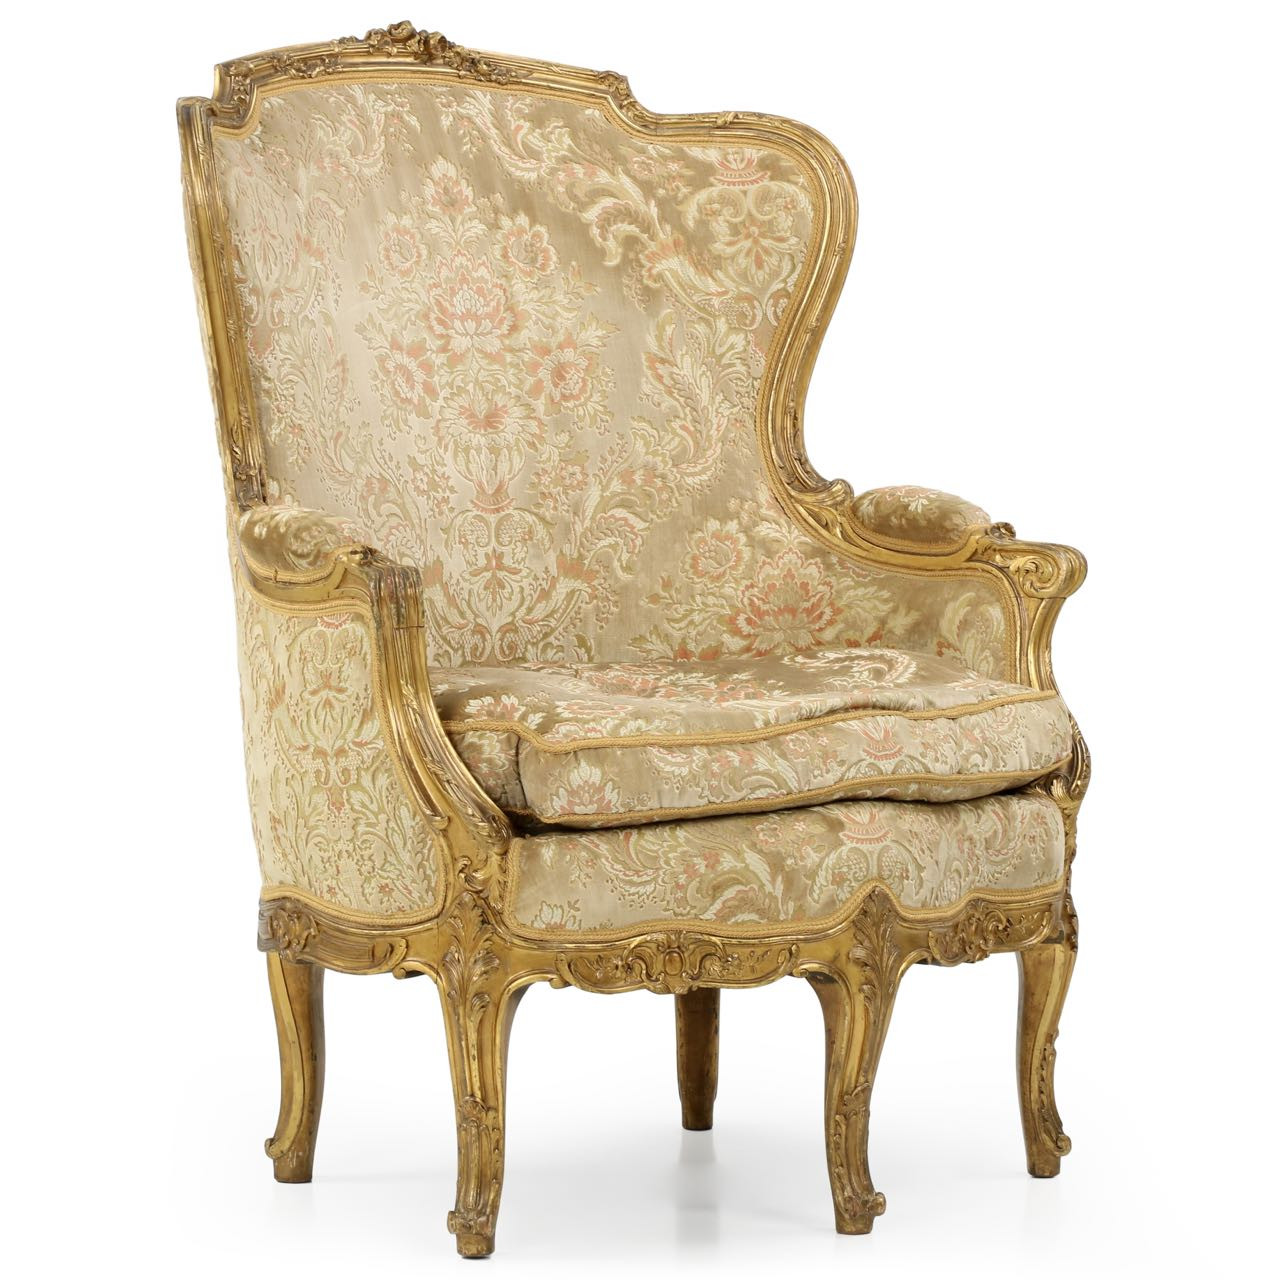 French Louis XV Style Giltwood Arm Chair, 19th Century